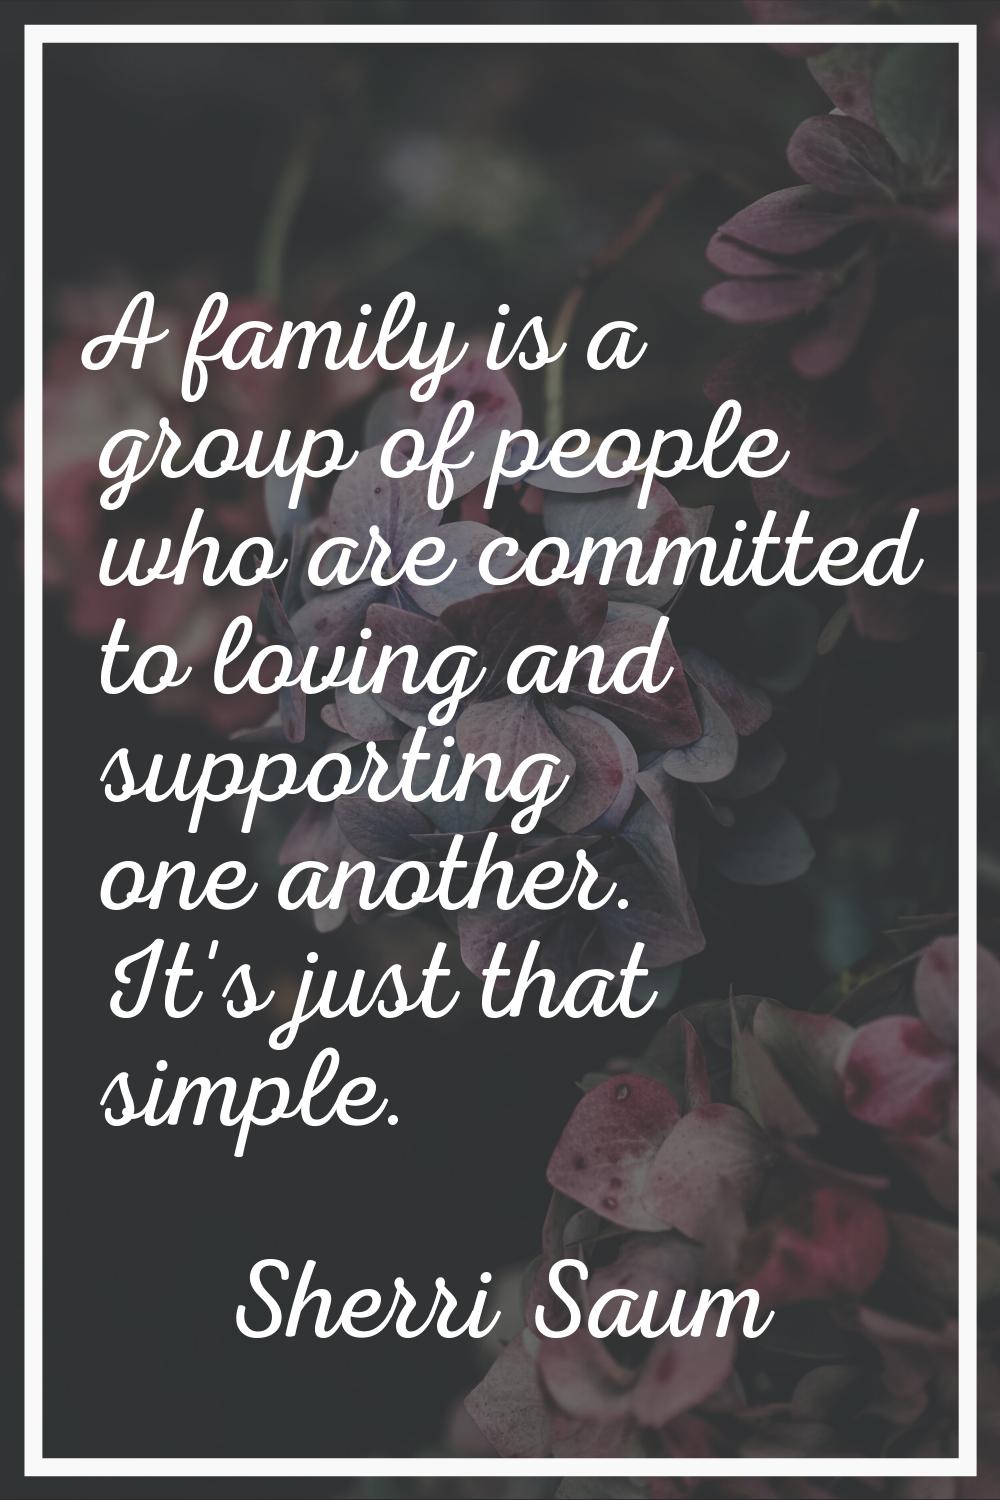 A family is a group of people who are committed to loving and supporting one another. It's just tha